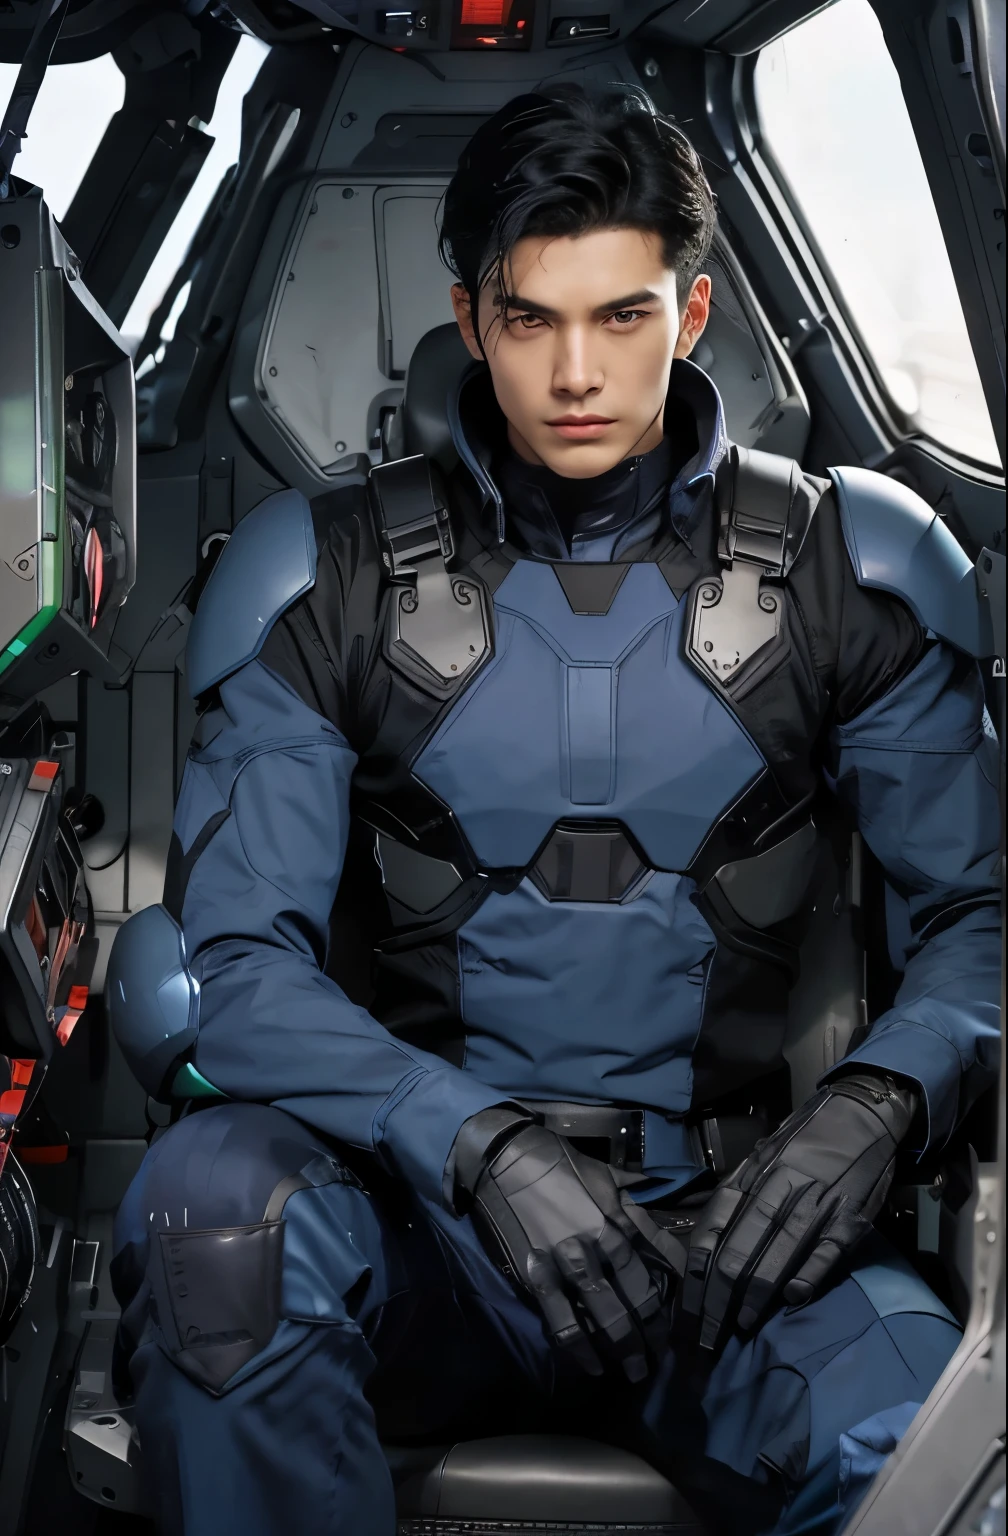 A handsome man. eighteen. Black hair. The man wears a blue-black metallic combat uniform. He is looking at the camera with a defiant expression. He is sitting in the robot's cockpit.